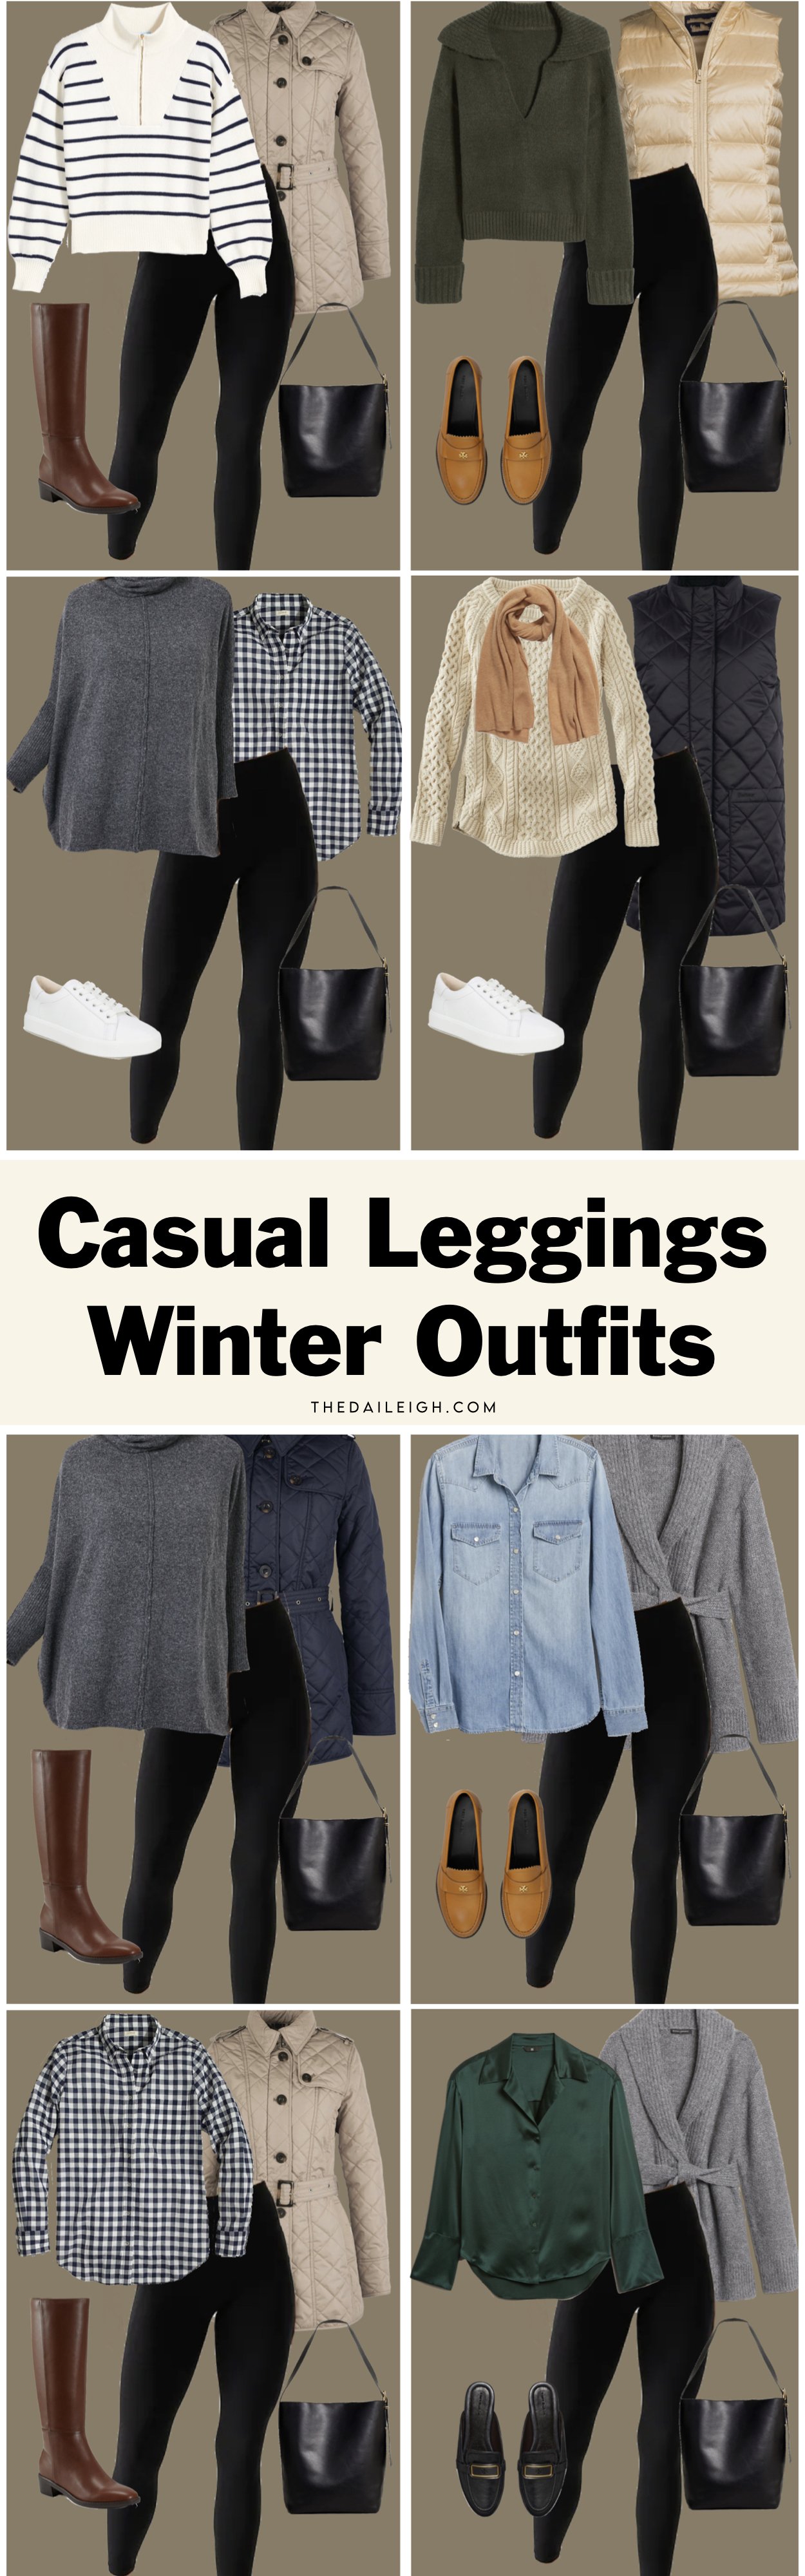 Business Casual Leggings Outfits - Wear Leggings to Work – LYSSÉ-thanhphatduhoc.com.vn